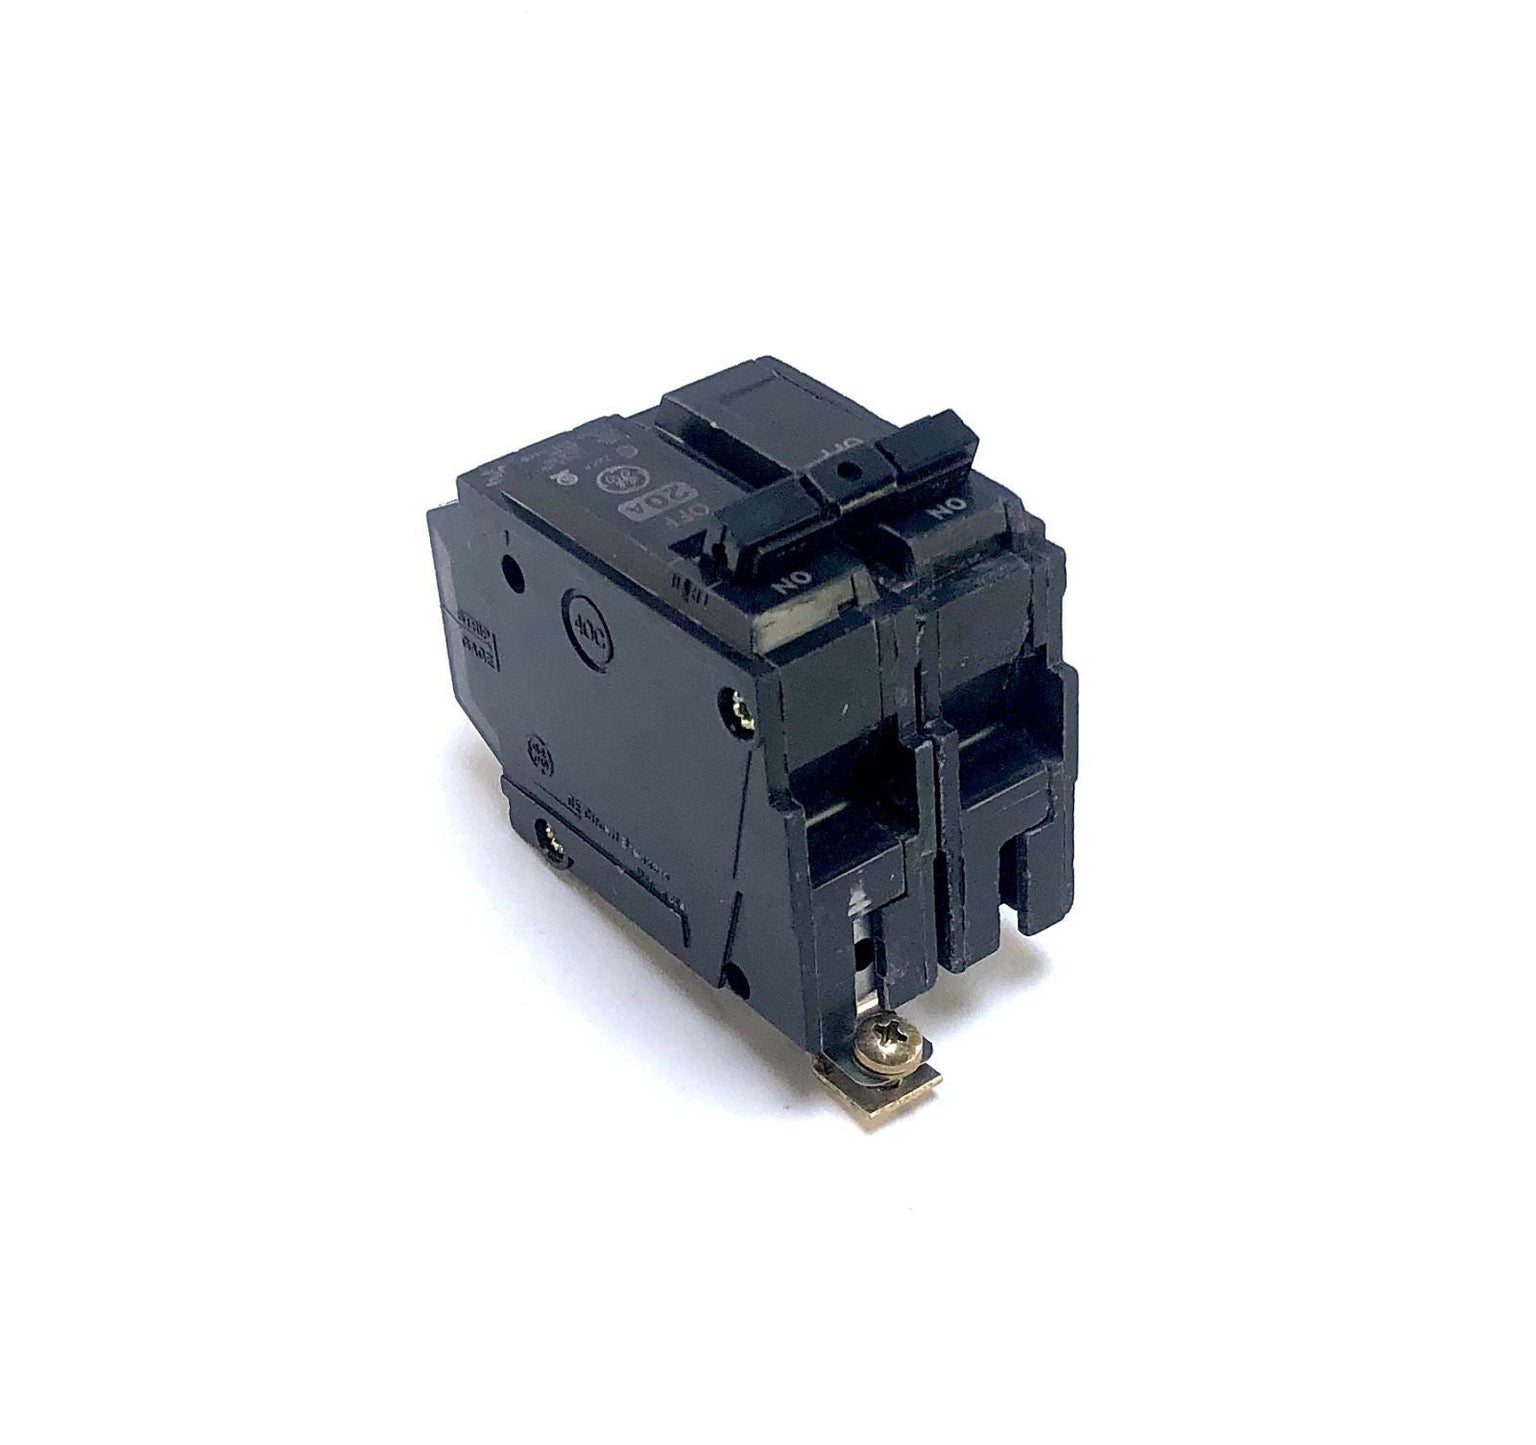 THHQB1120ST1 - General Electrics - Molded Case Circuit Breakers